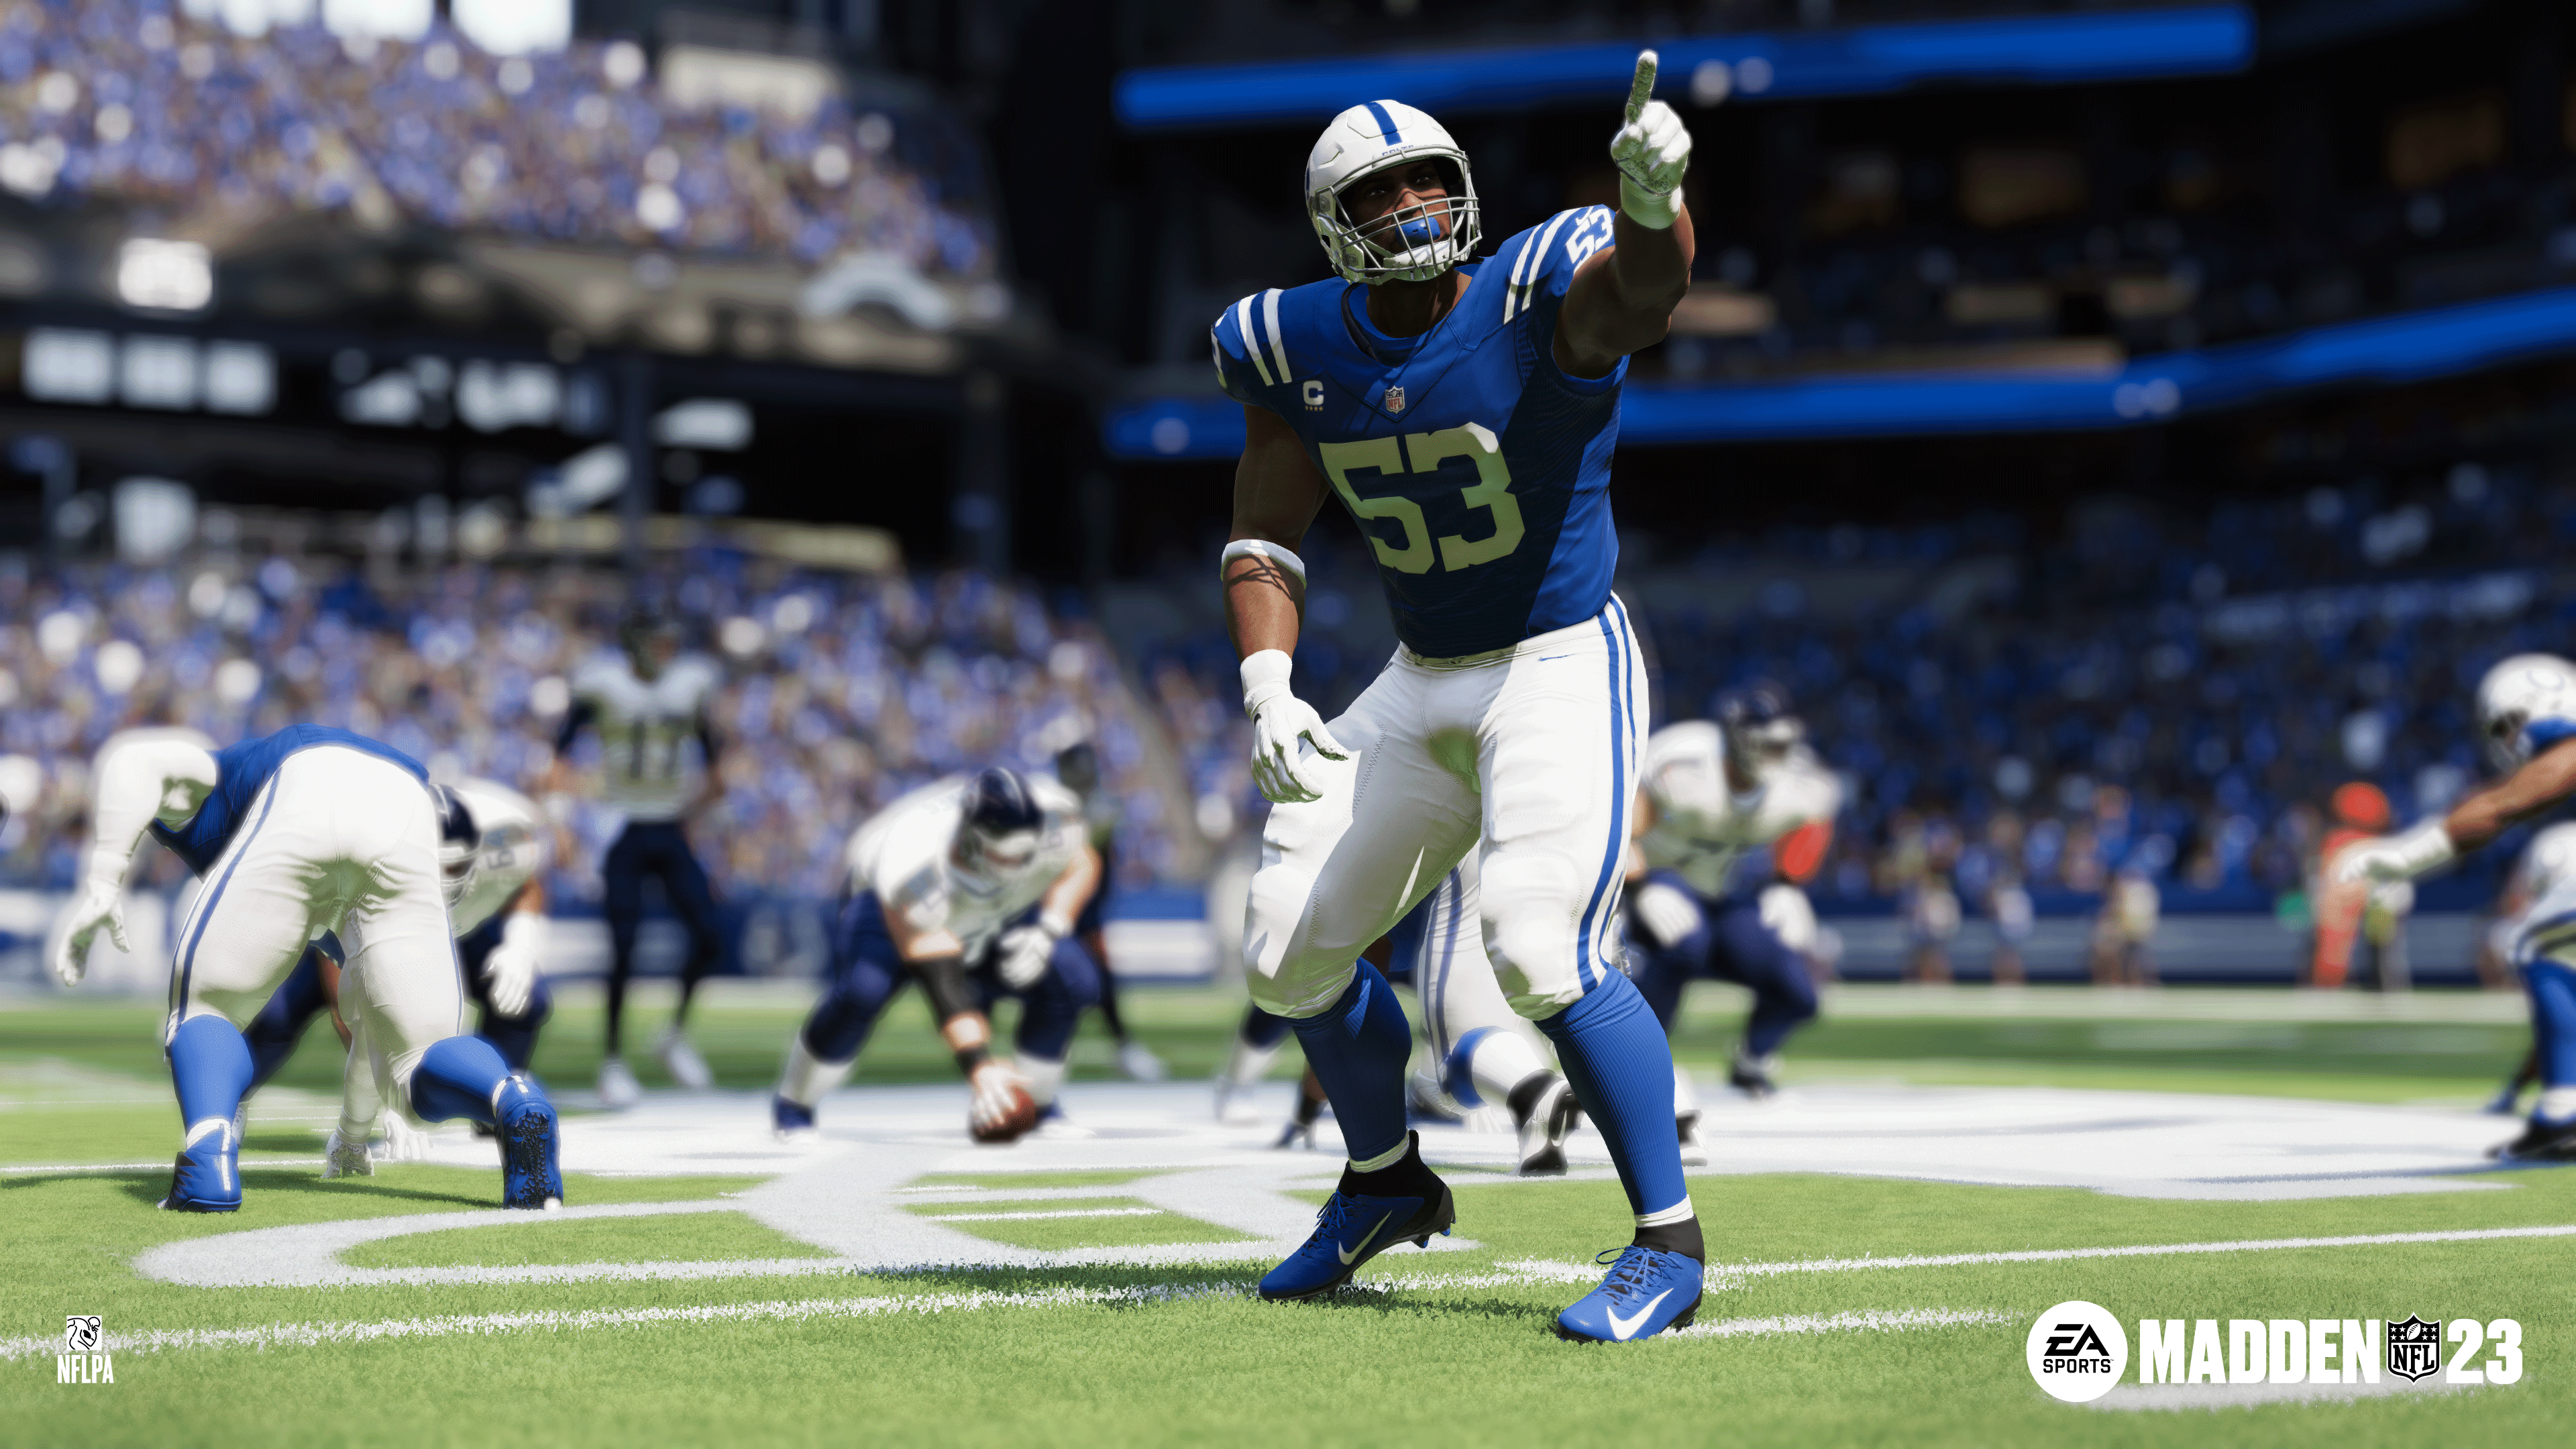 Madden NFL 22 HD Madden NFL 22 Wallpapers  HD Wallpapers  ID 83223